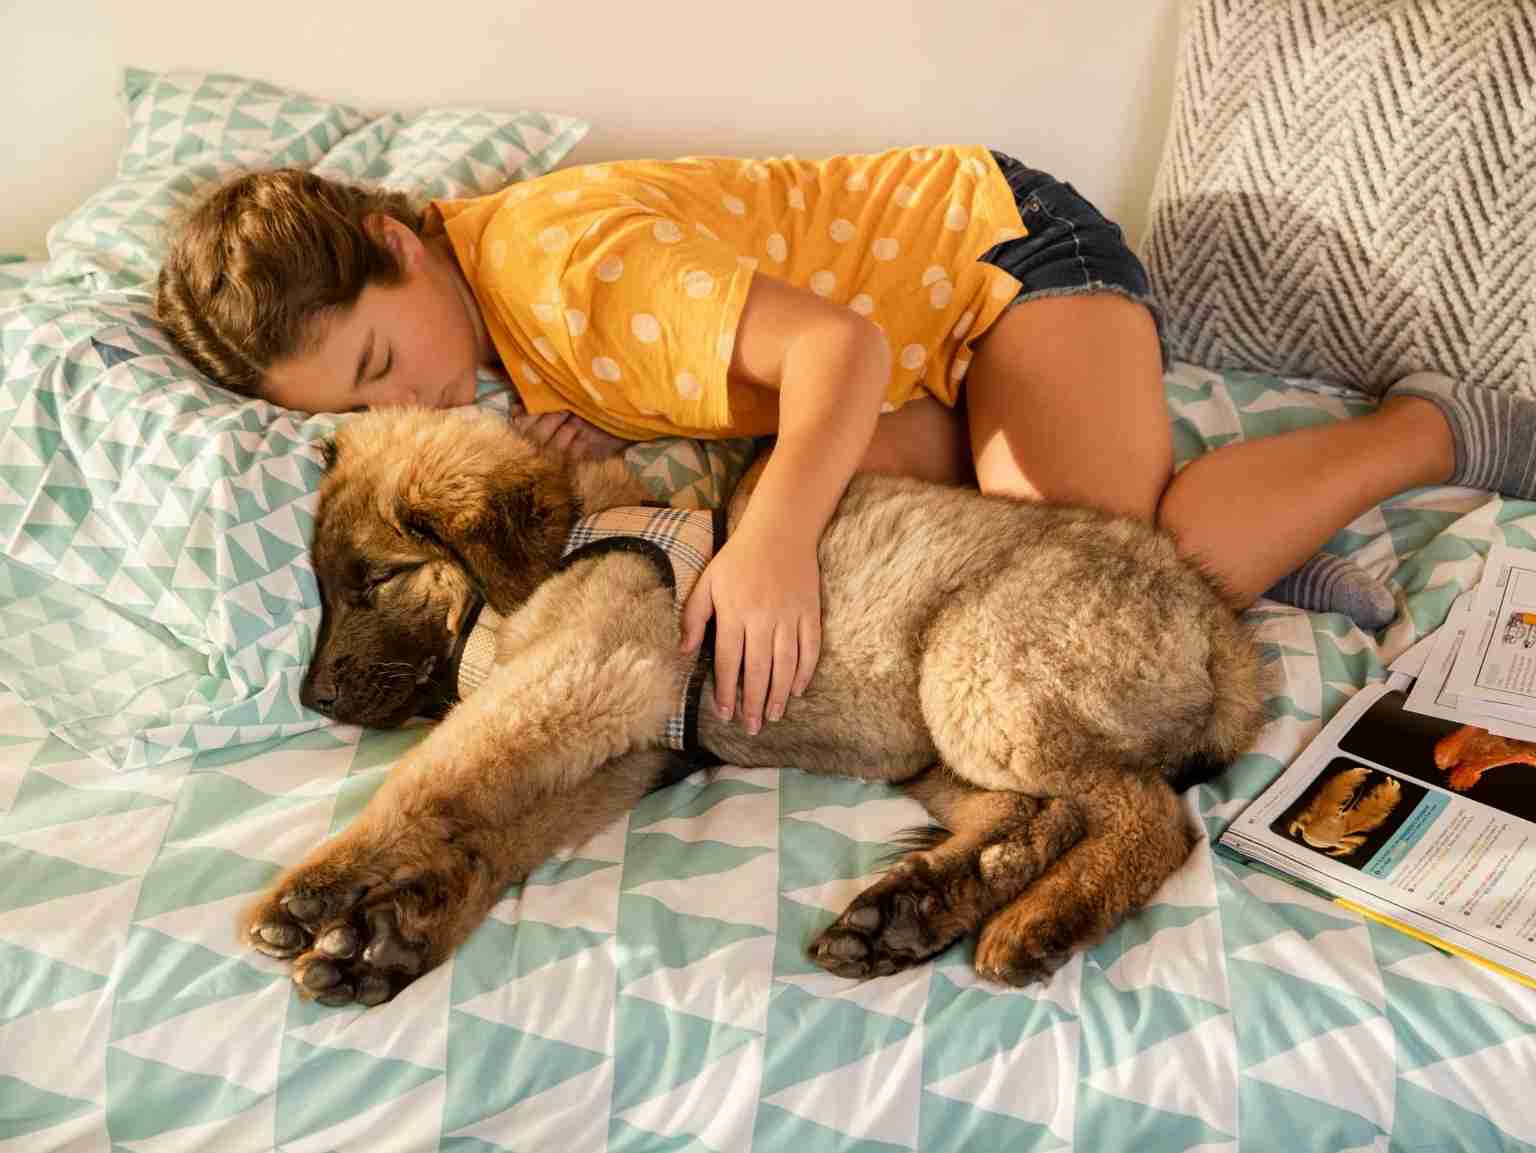 A young girl sleeping next to her puppy